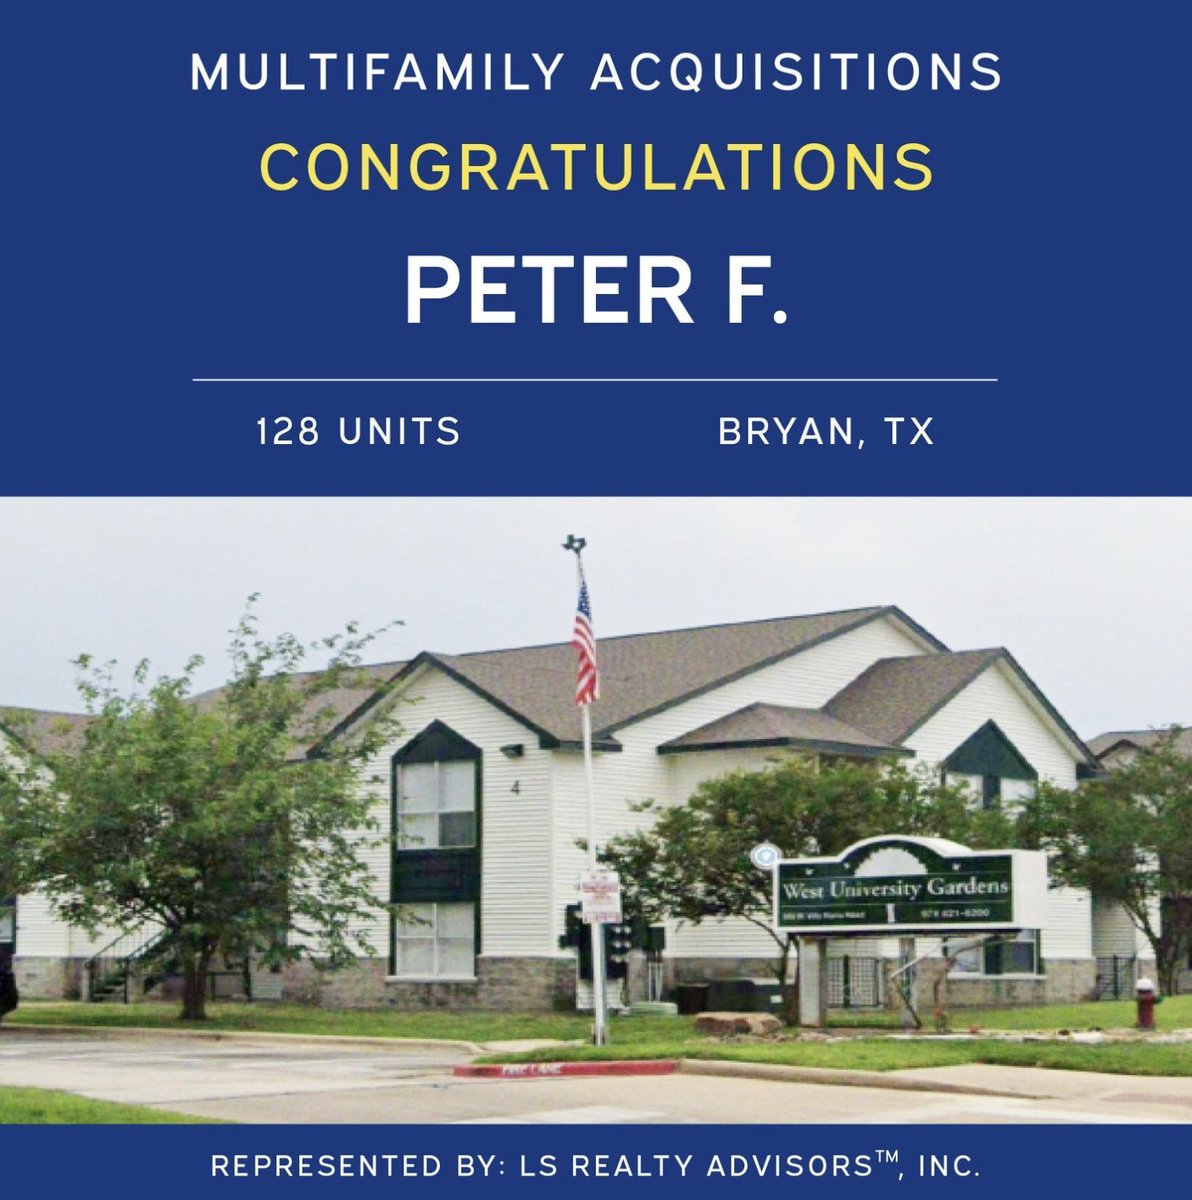 luinc: 🎉 Congratulations Peter and Investor Members on your recent Multifamily Acquisition 👏 #multifamilyinvesting #multifamilyrealestate #lifestylesunlimited #passiveincome #realestateinvesting #retireearly #investinginrealestate #investing